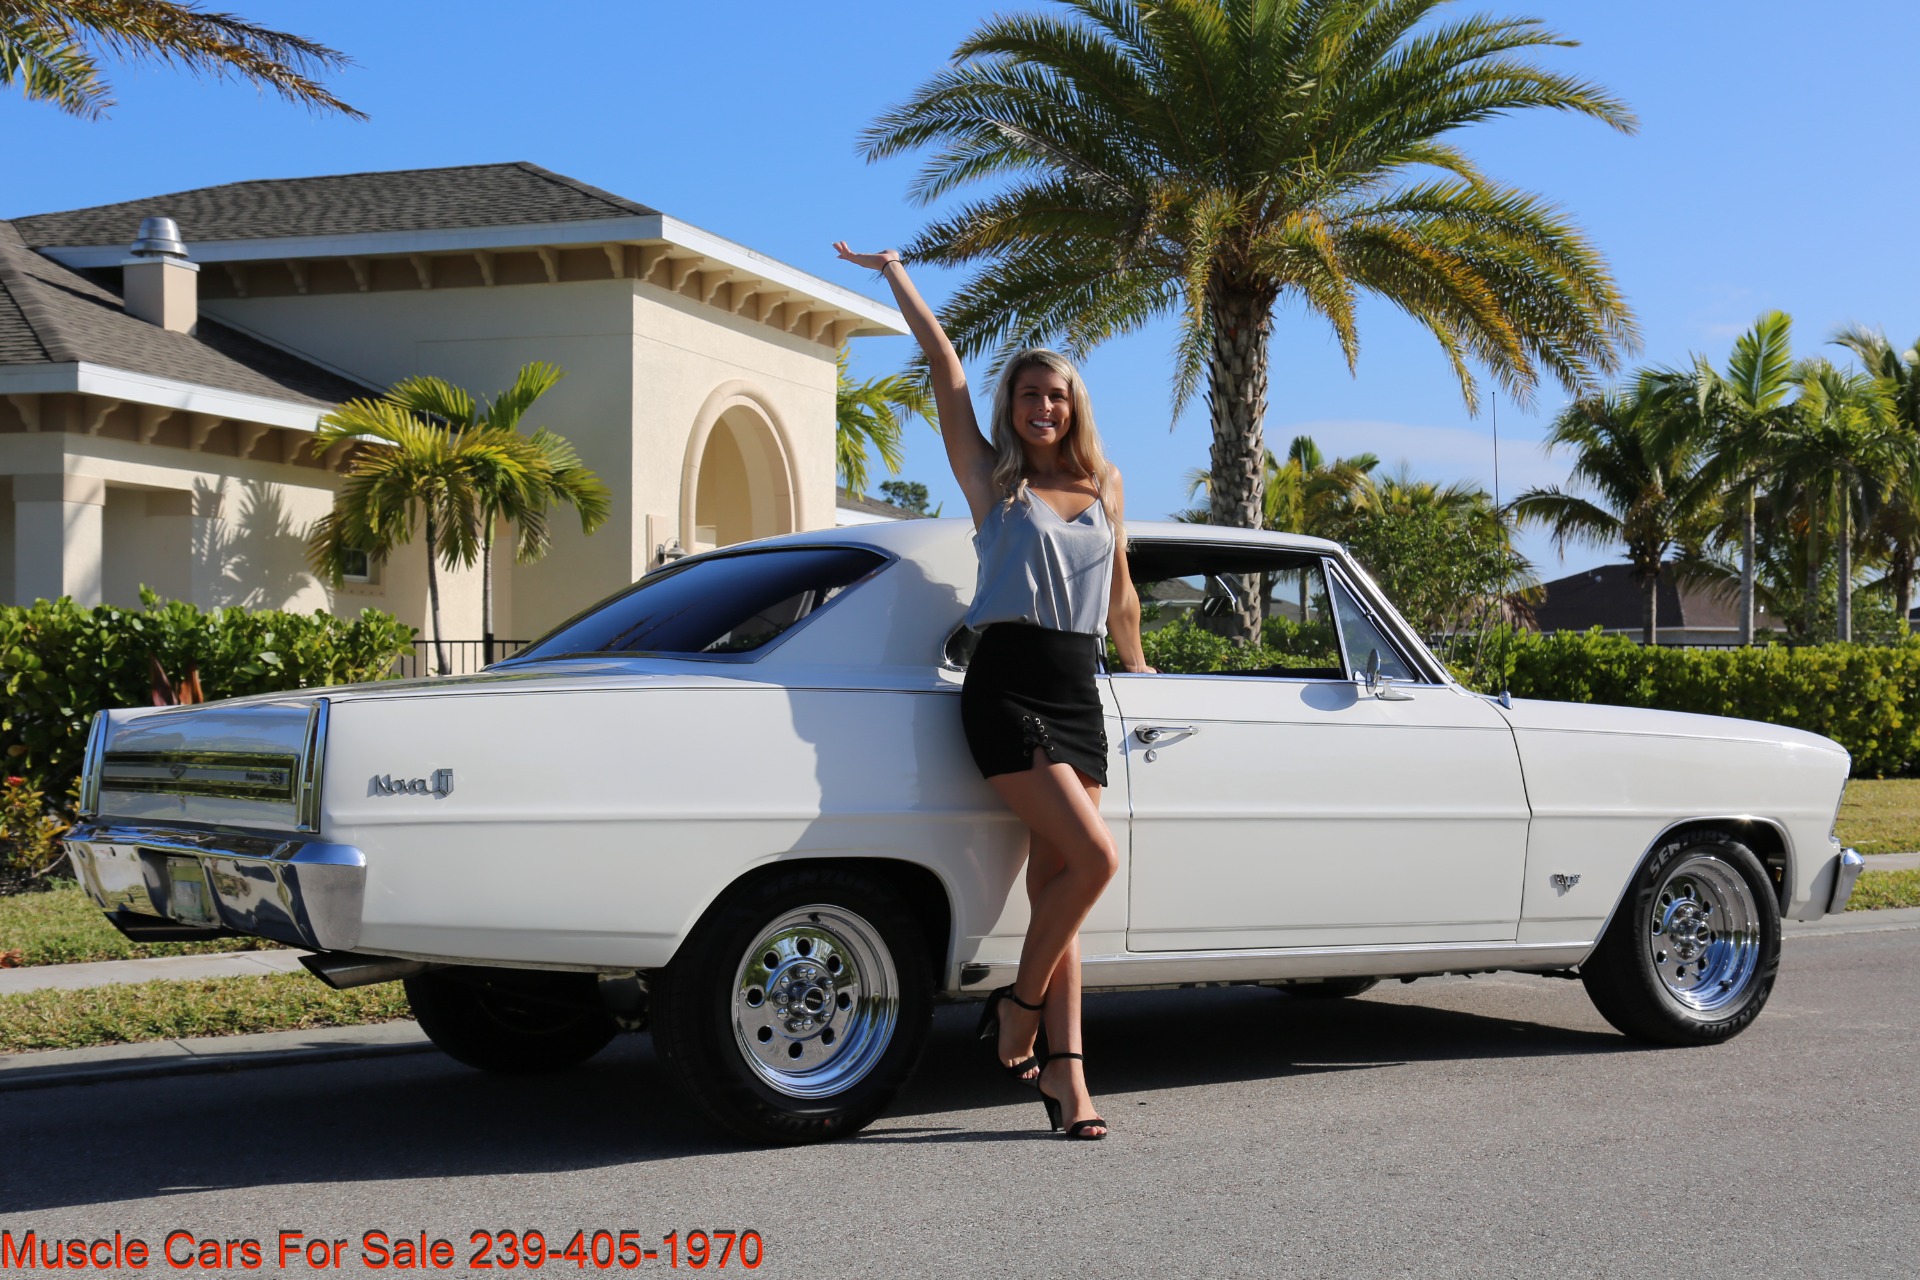 Used 1967 Chvey Nova Muscle Car For Sale ($28,000) | Muscle Cars for